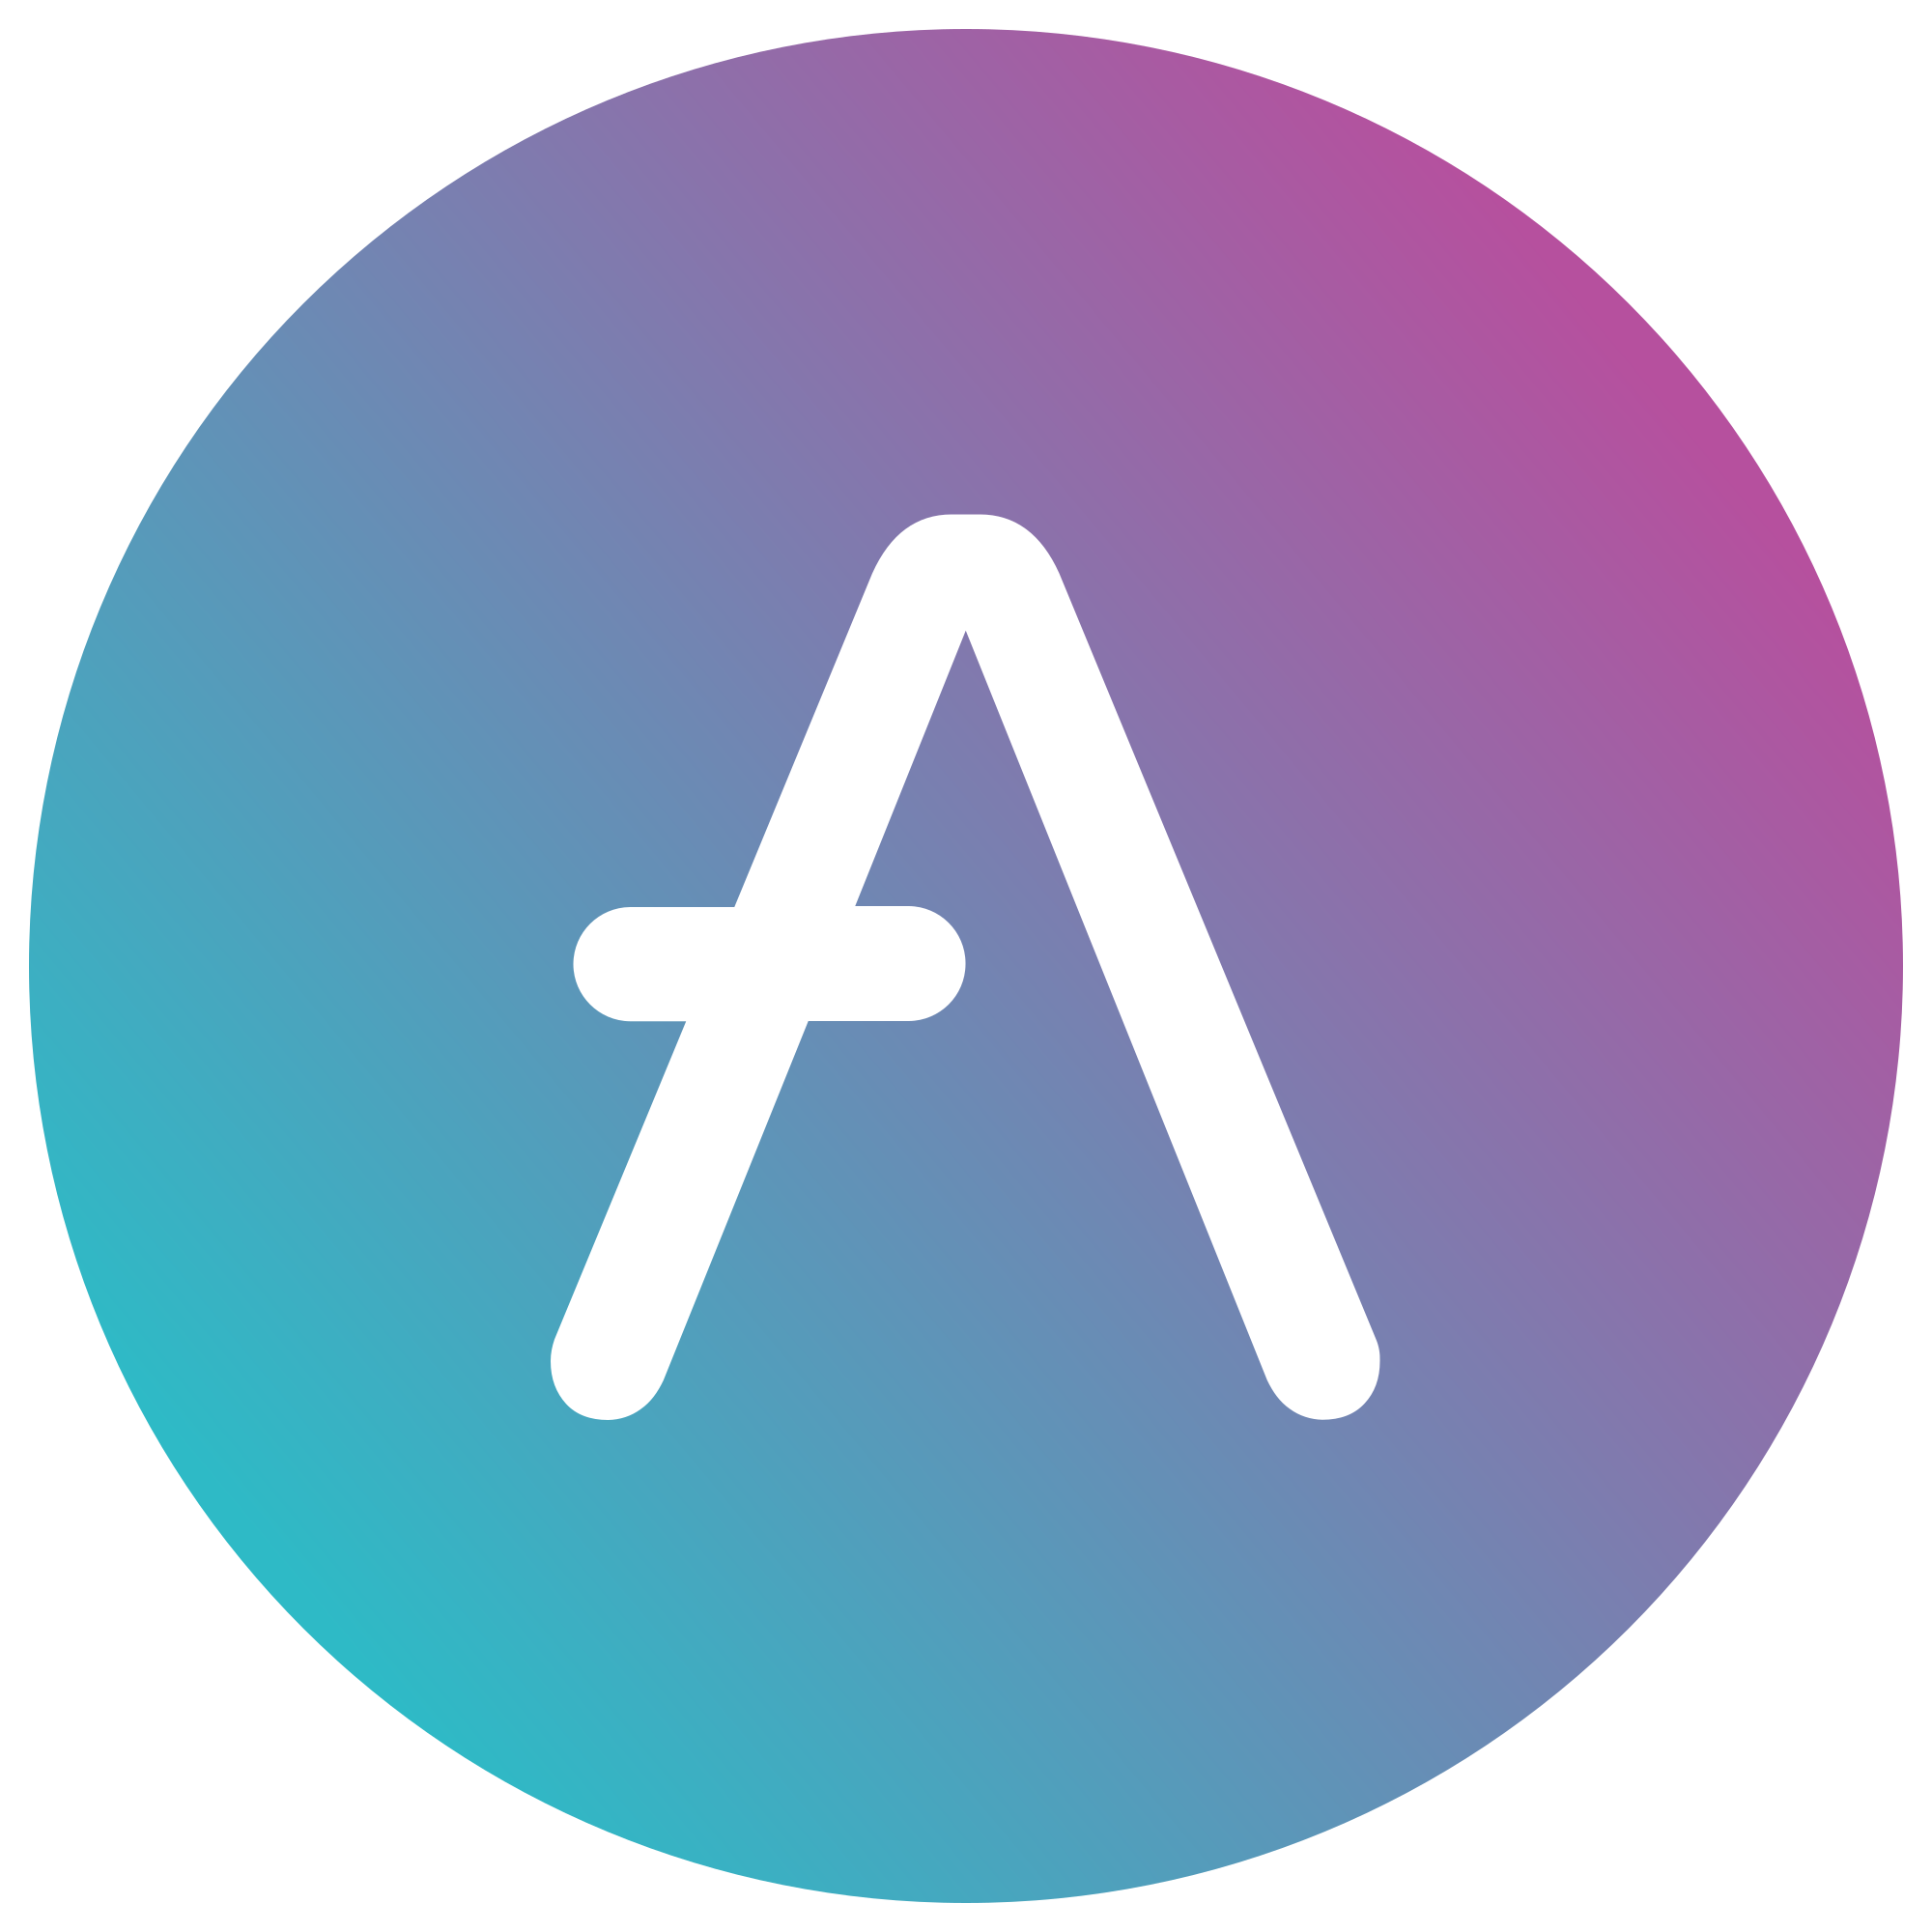 Aave (AAVE) Logo .SVG and .PNG Files Download